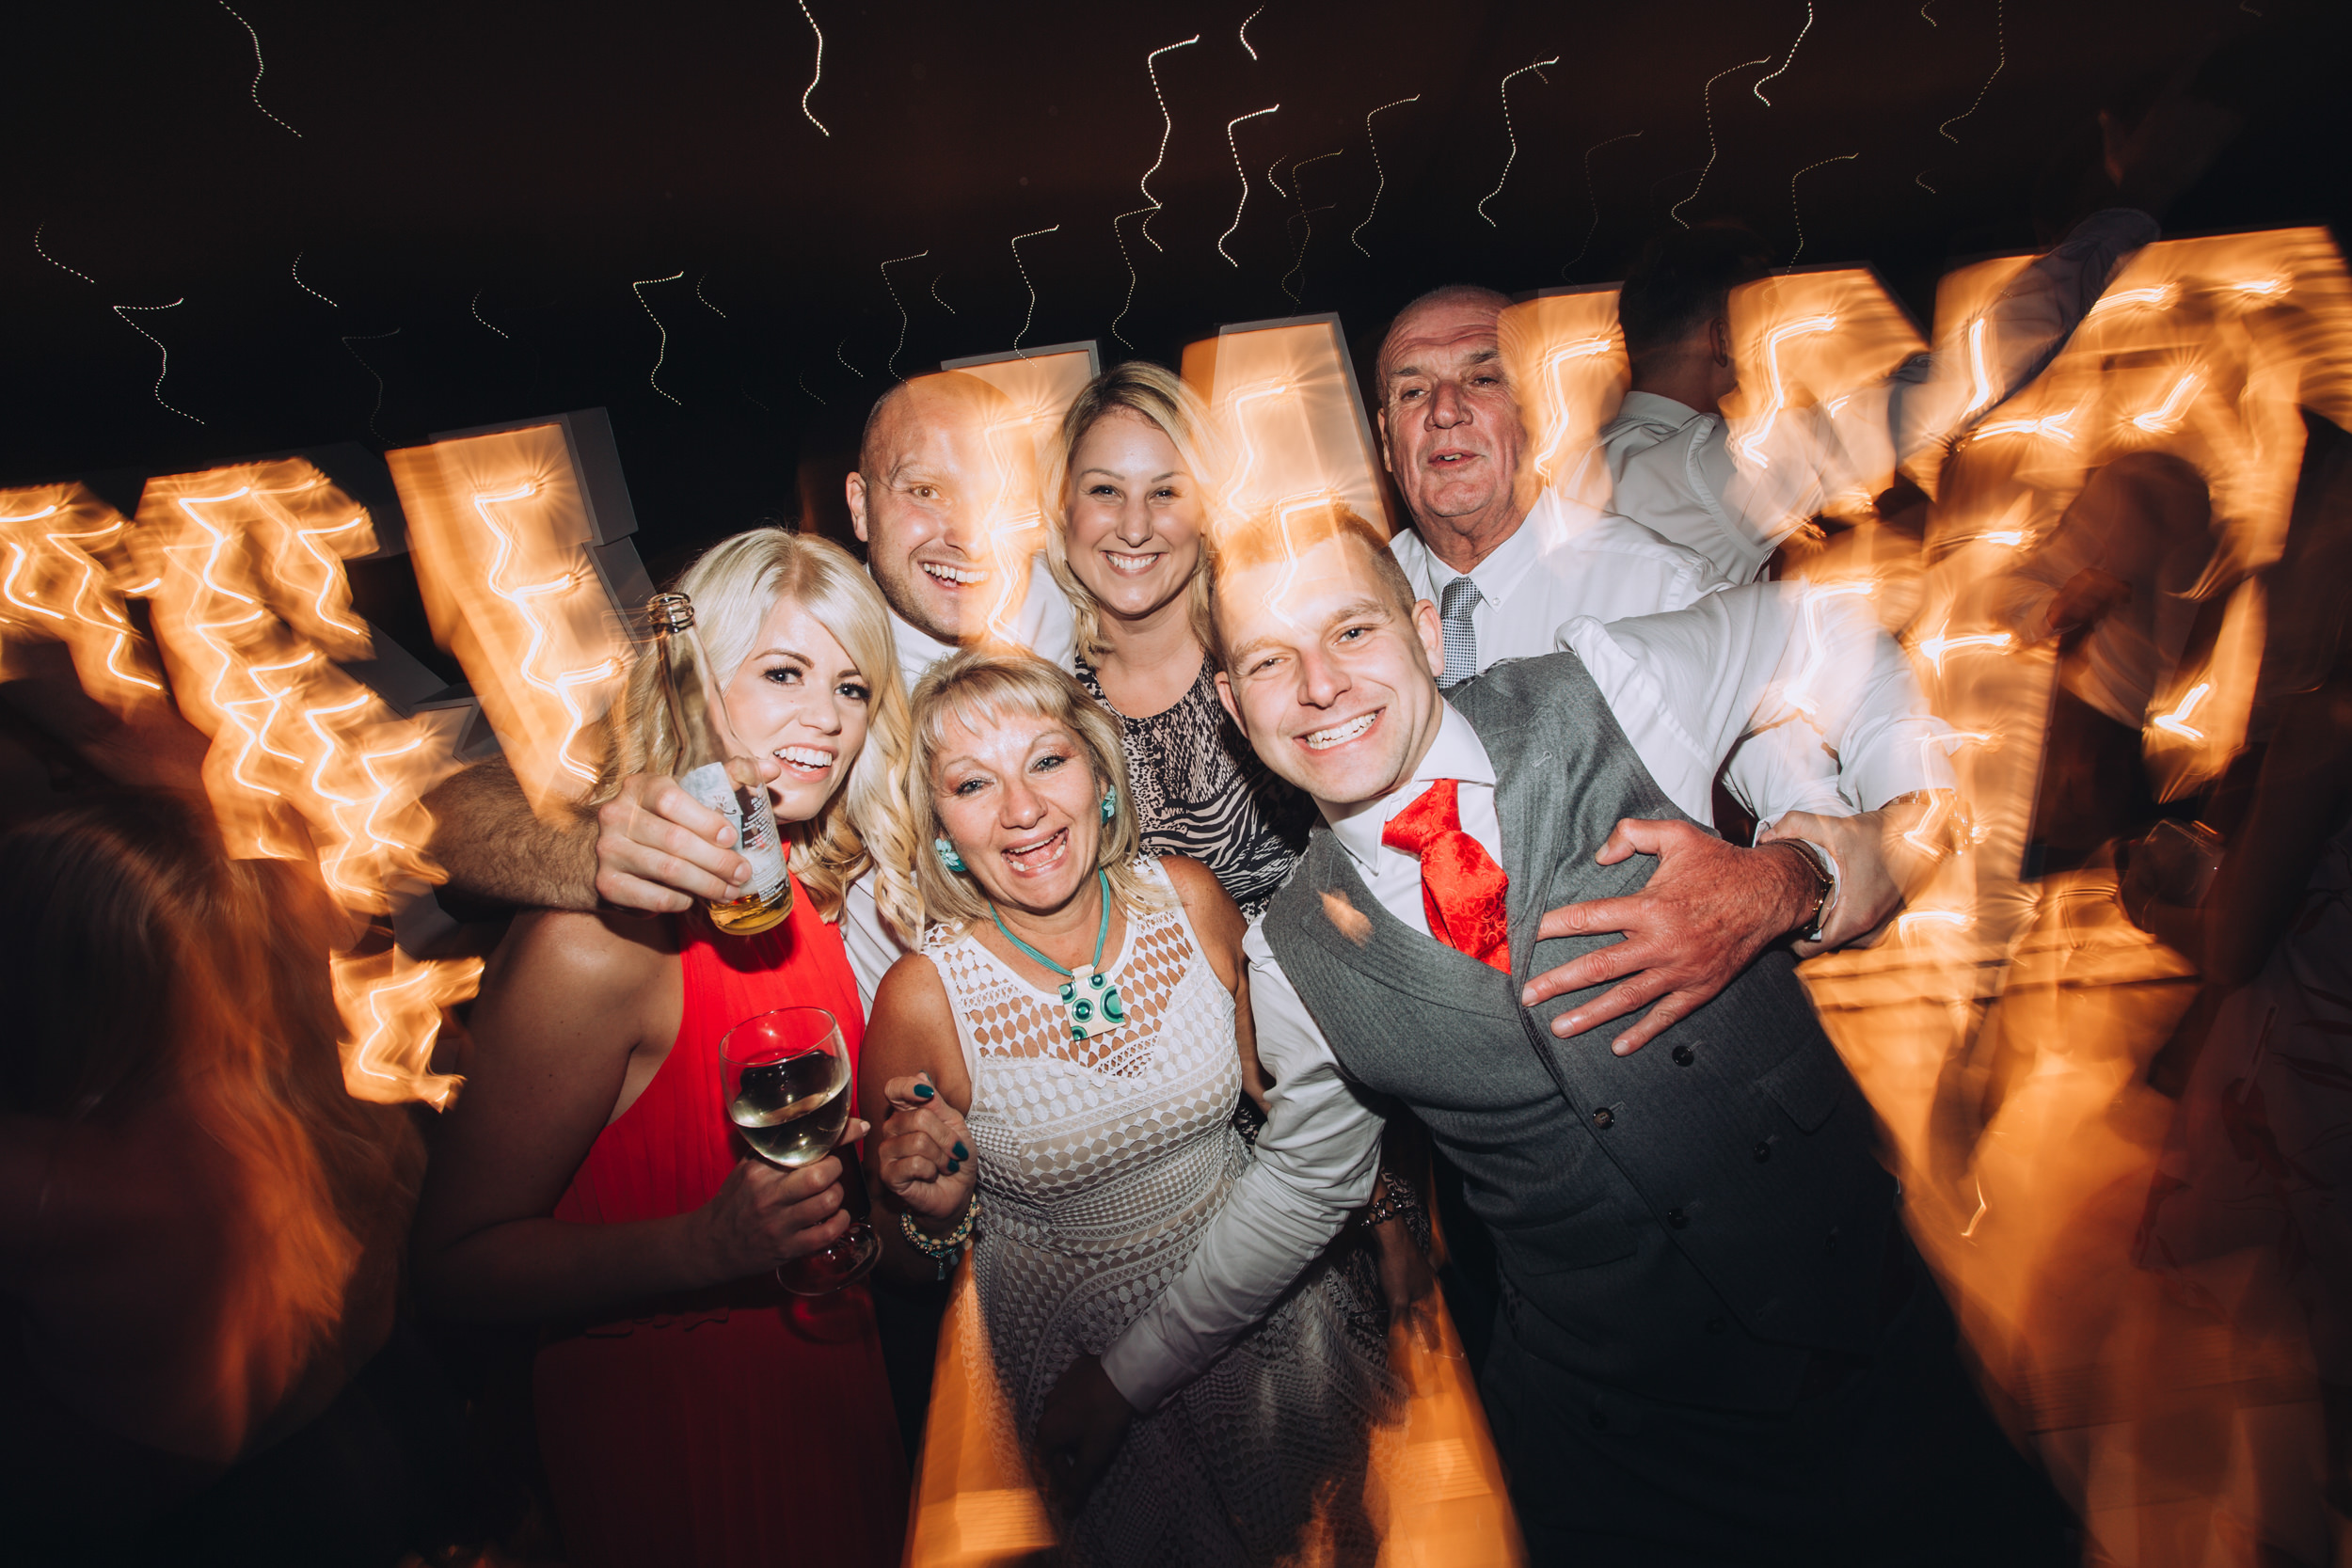 priory cottages wetherby wedding photographers88.jpg